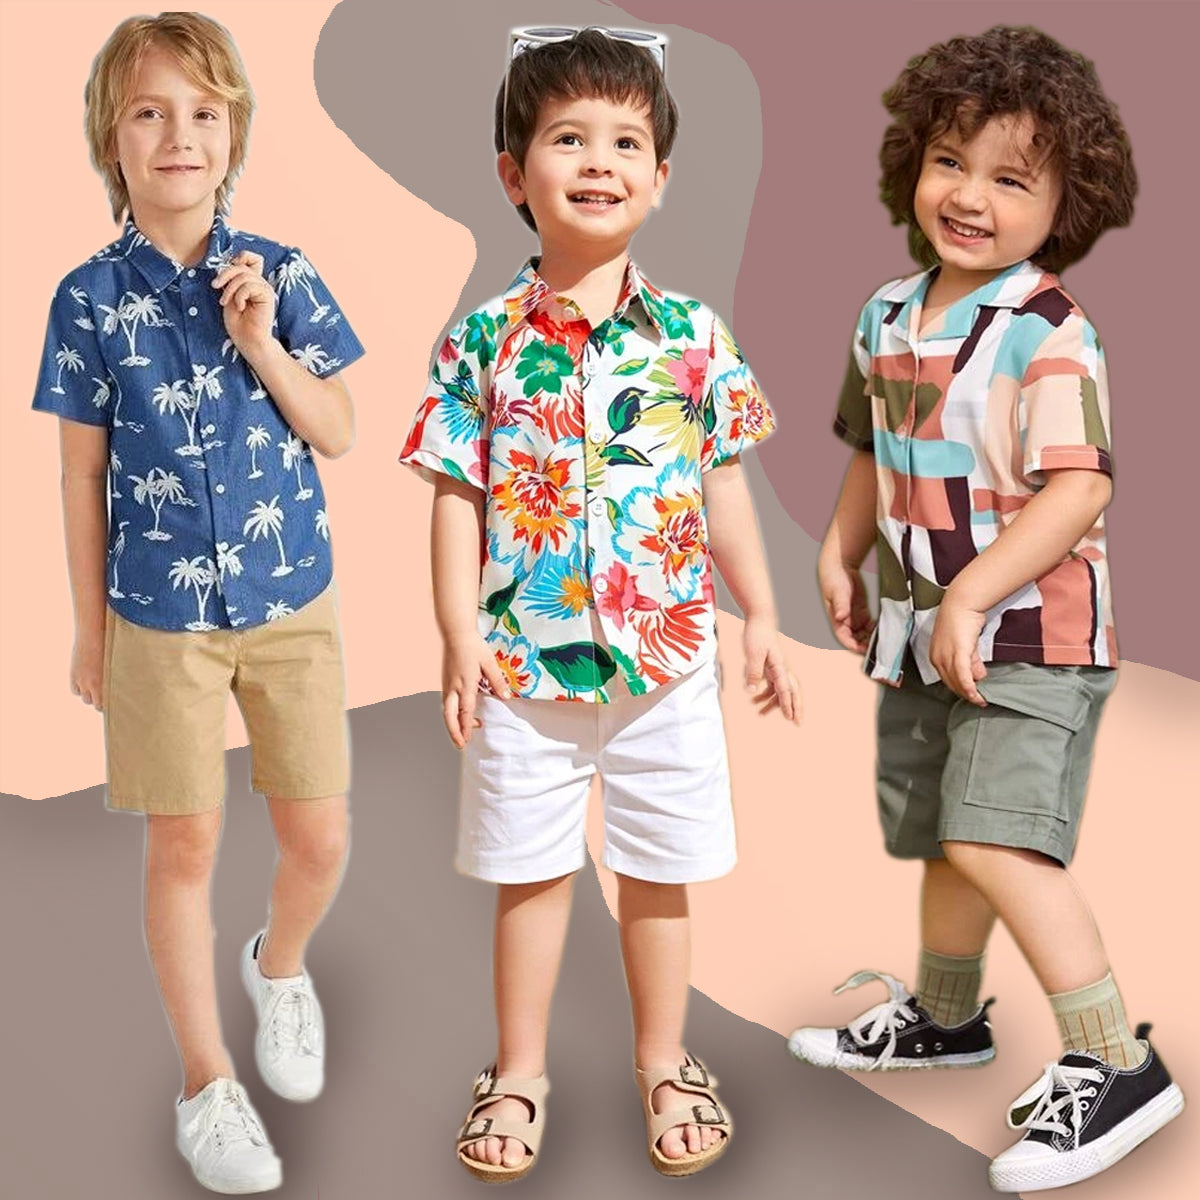 Venutaloza Floral & Tree Cocount and Multicolor Designer Button Front (Combo Pack Of 3) Shirt For Boy.